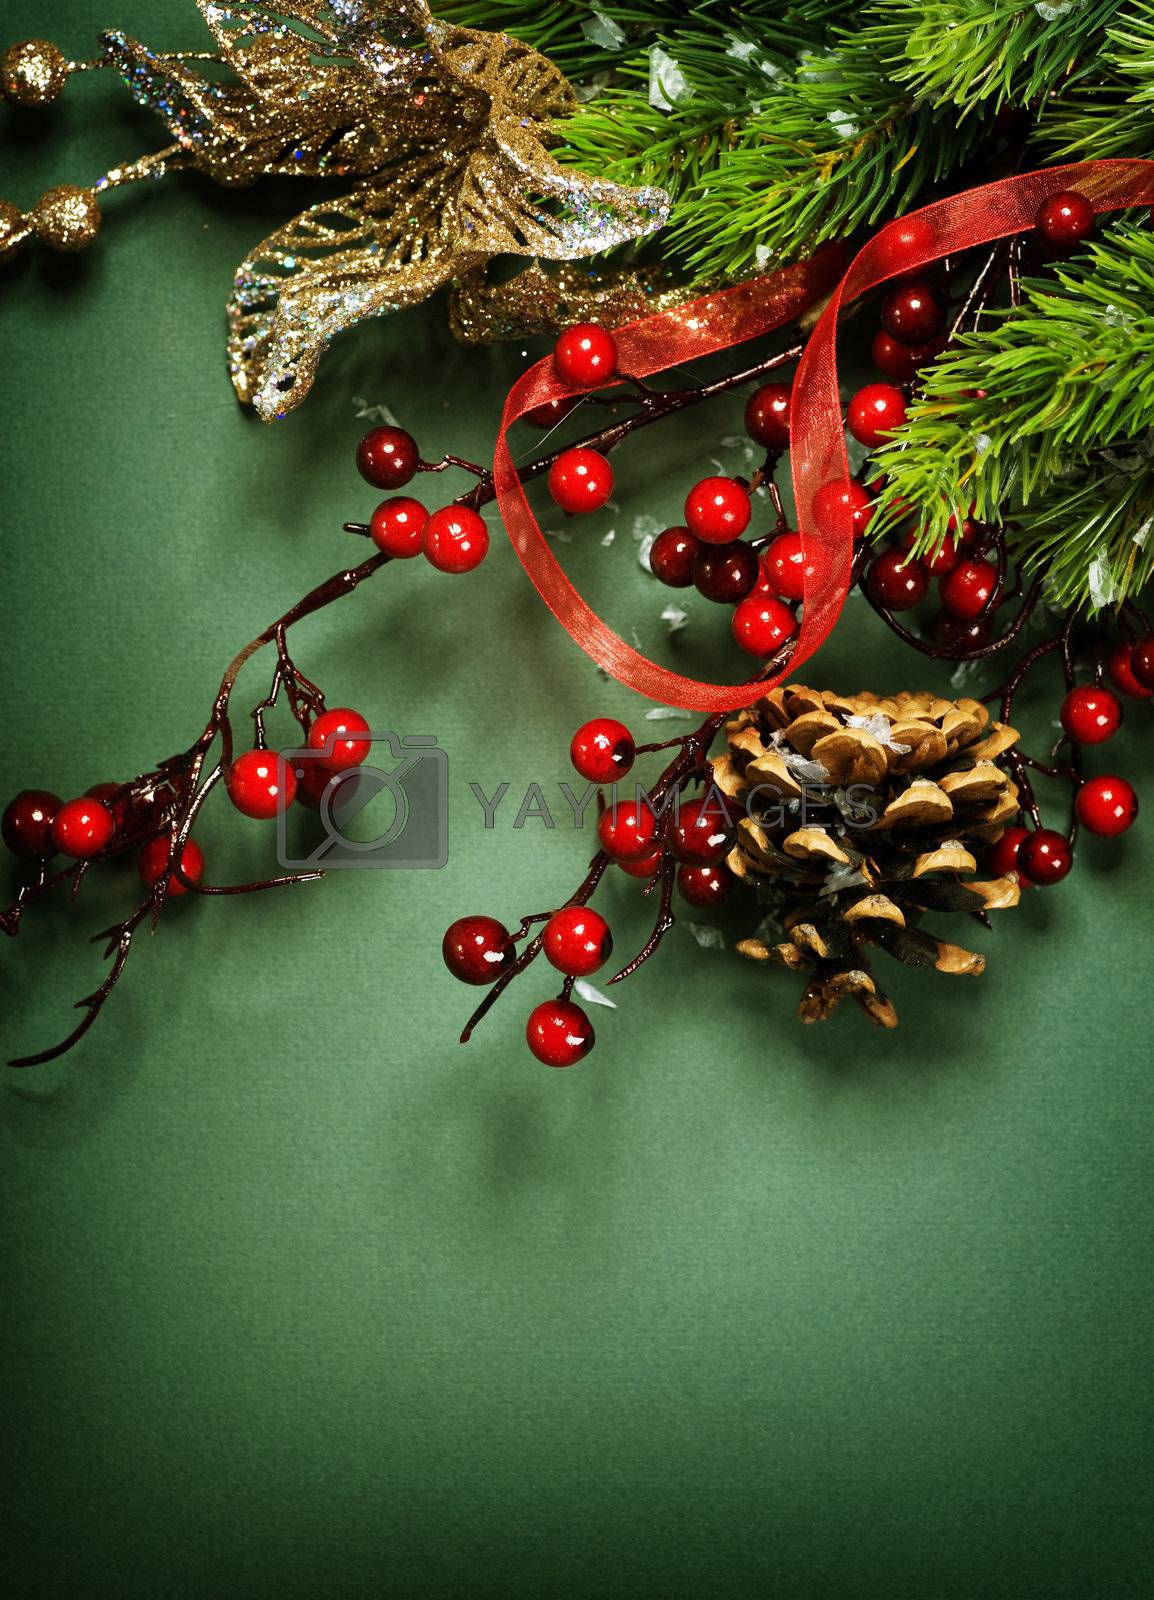 Royalty free image of Christmas background by SubbotinaA